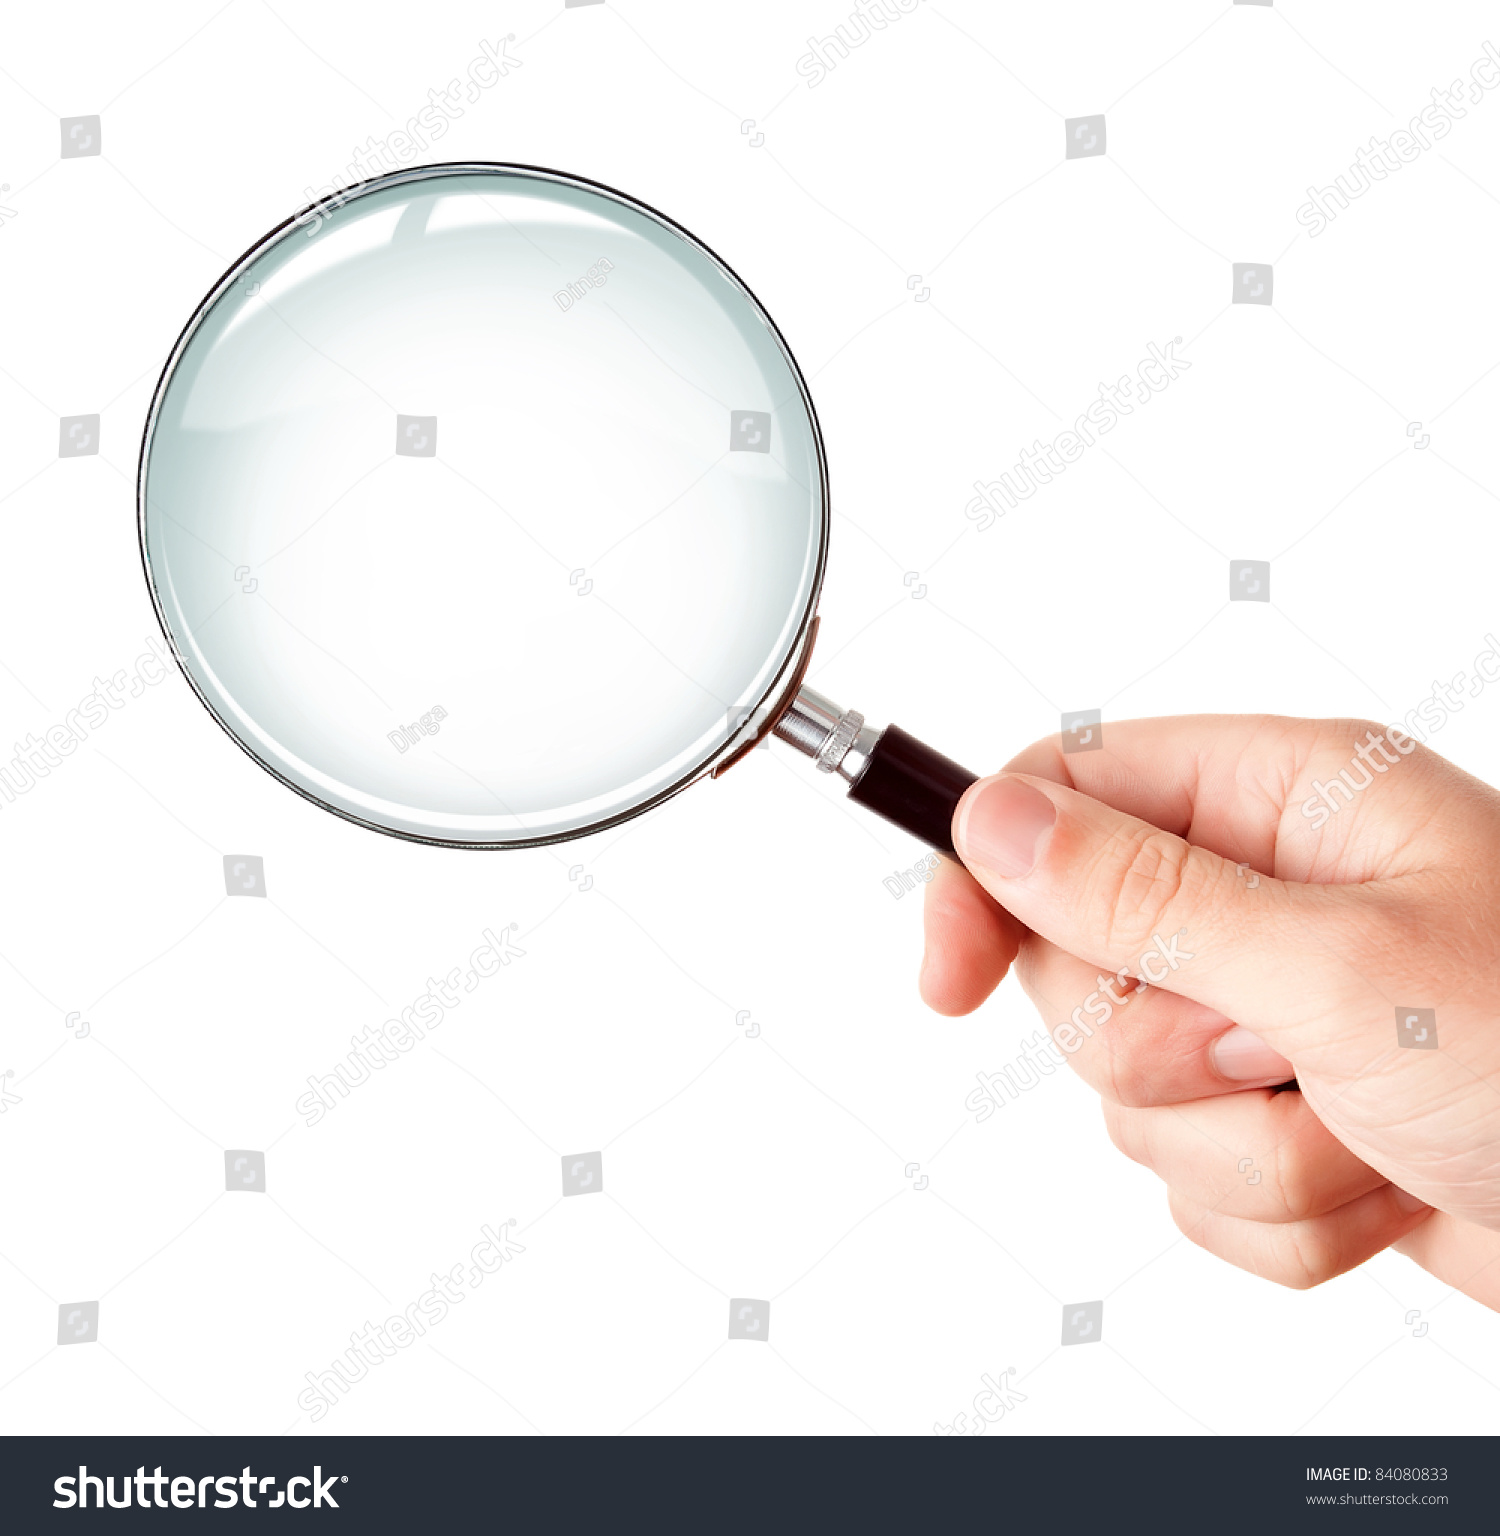 Man's hand, holding classic styled magnifying glass, closeup isolated on white background, copy space for your image or text #84080833